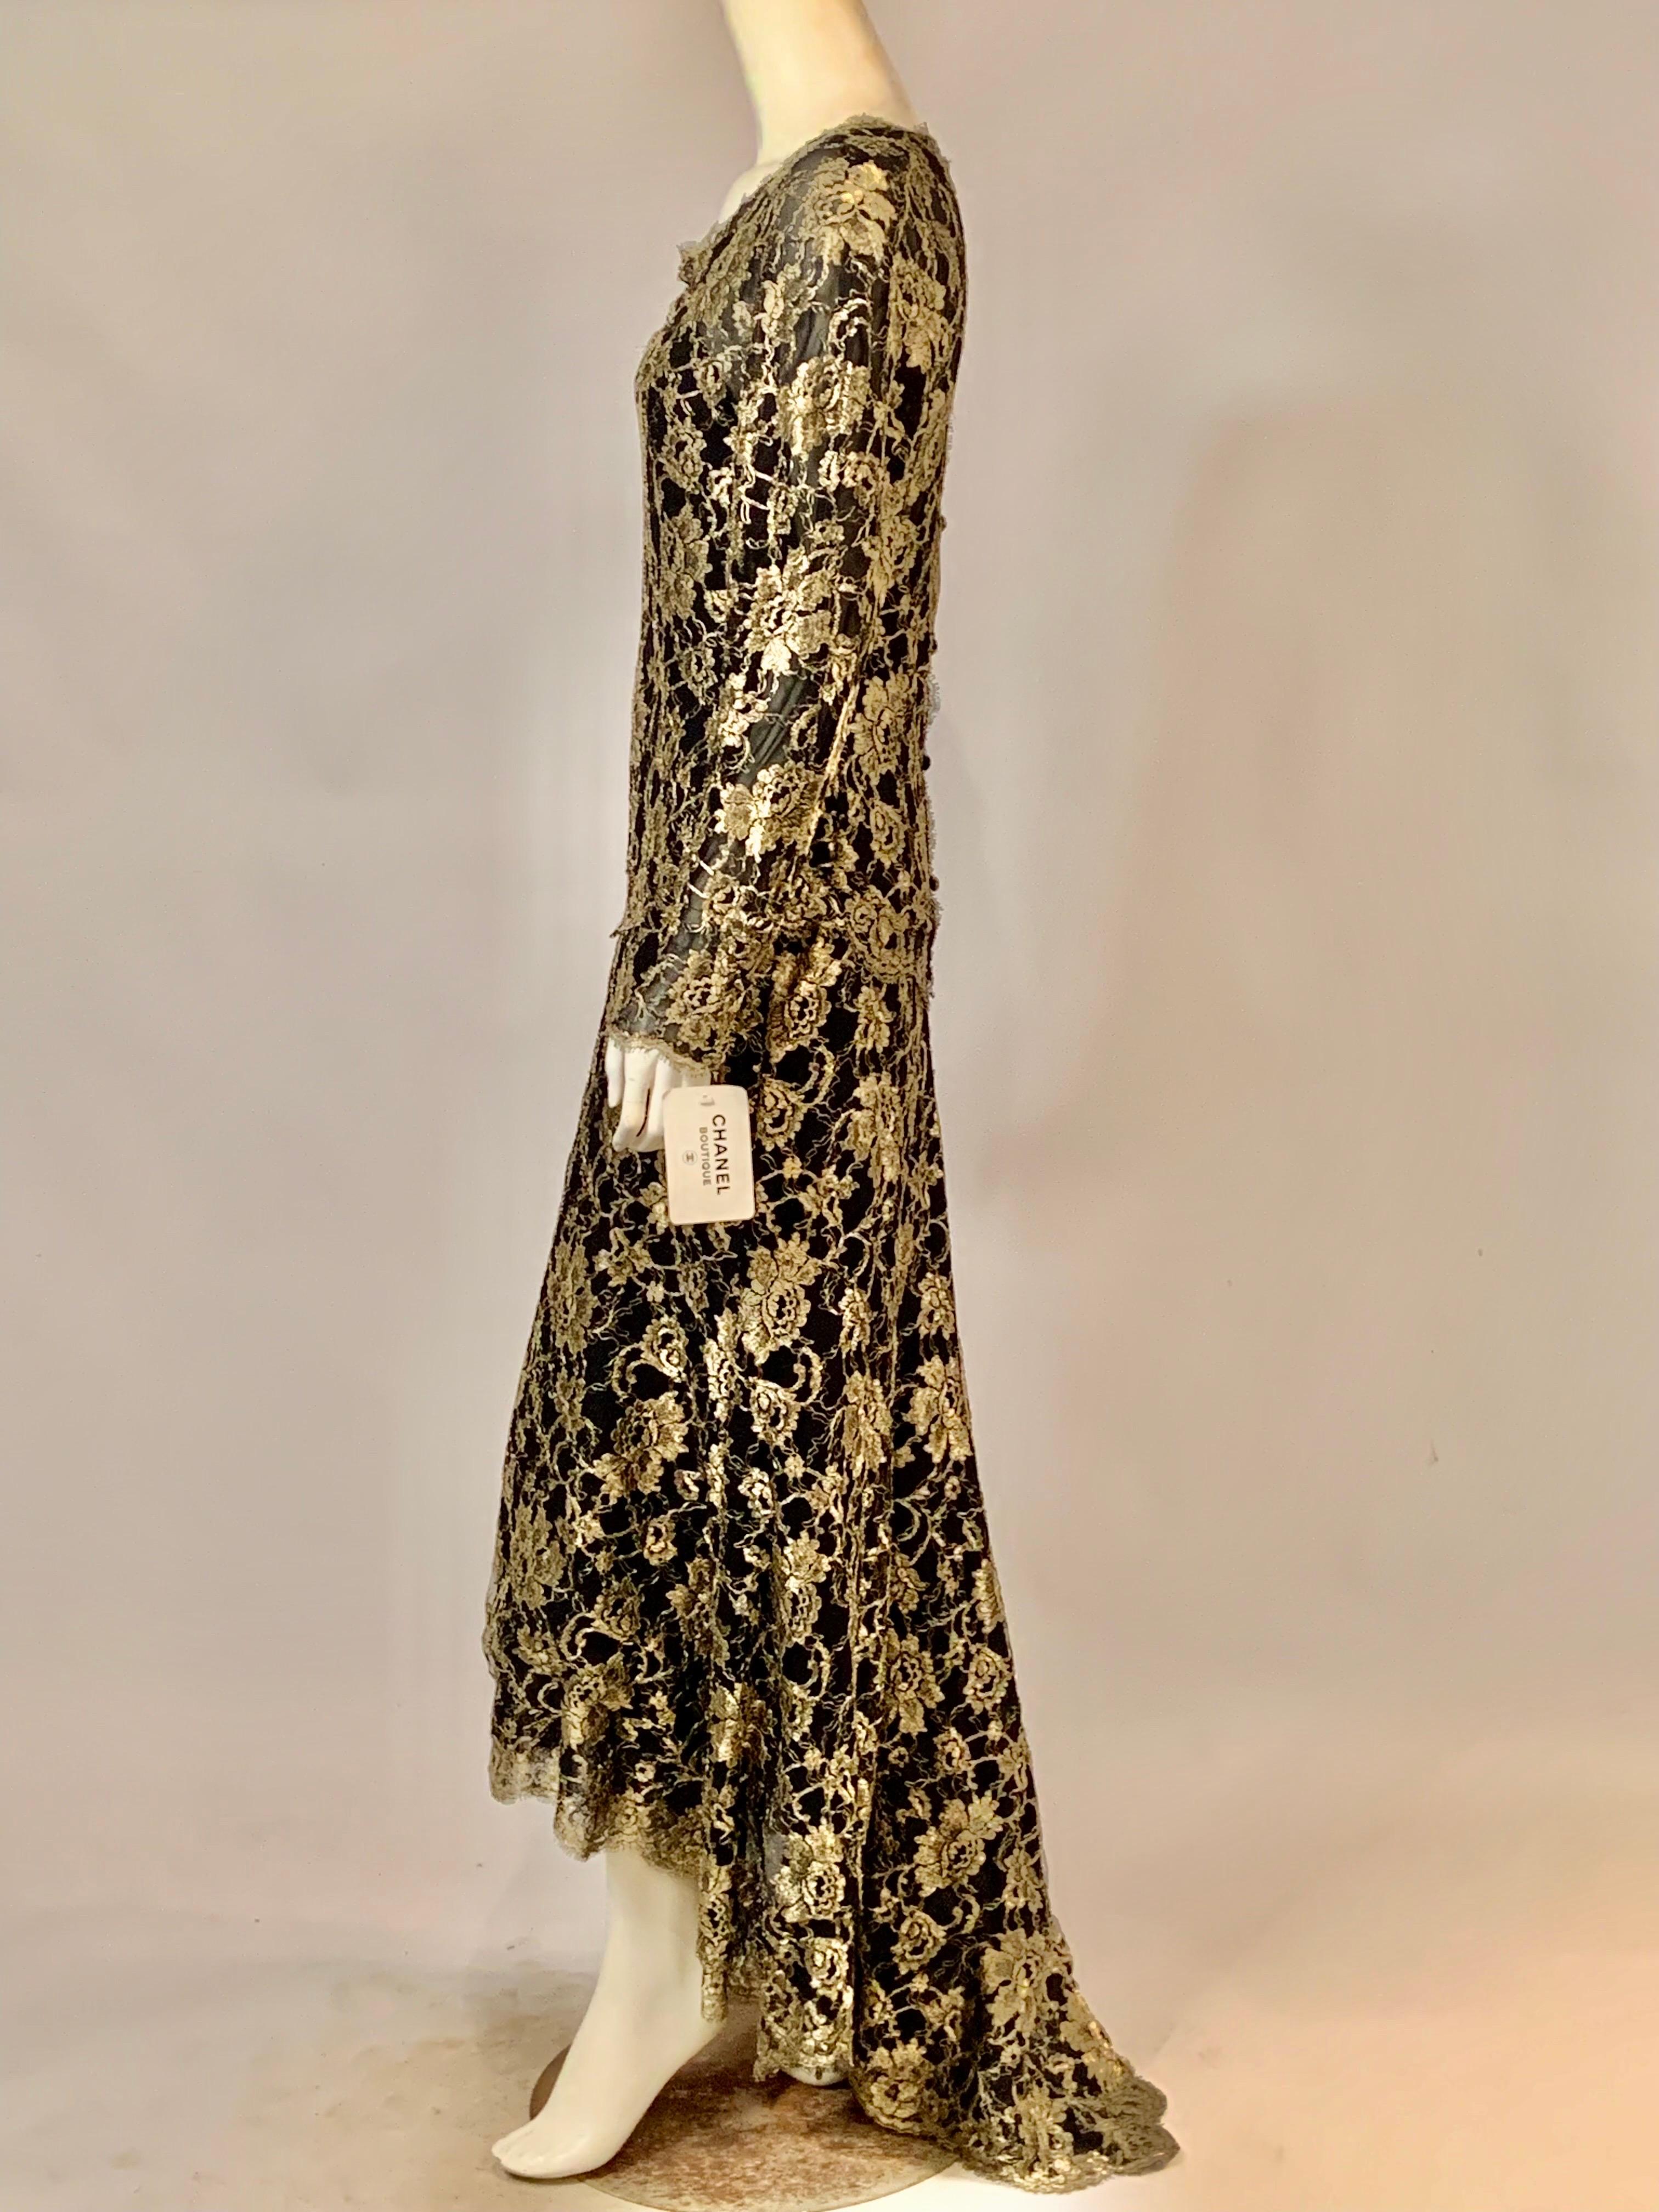 1986 Chanel by Karl Lagerfeld Gold and Black Lace Gown with Train Original Tag For Sale 2